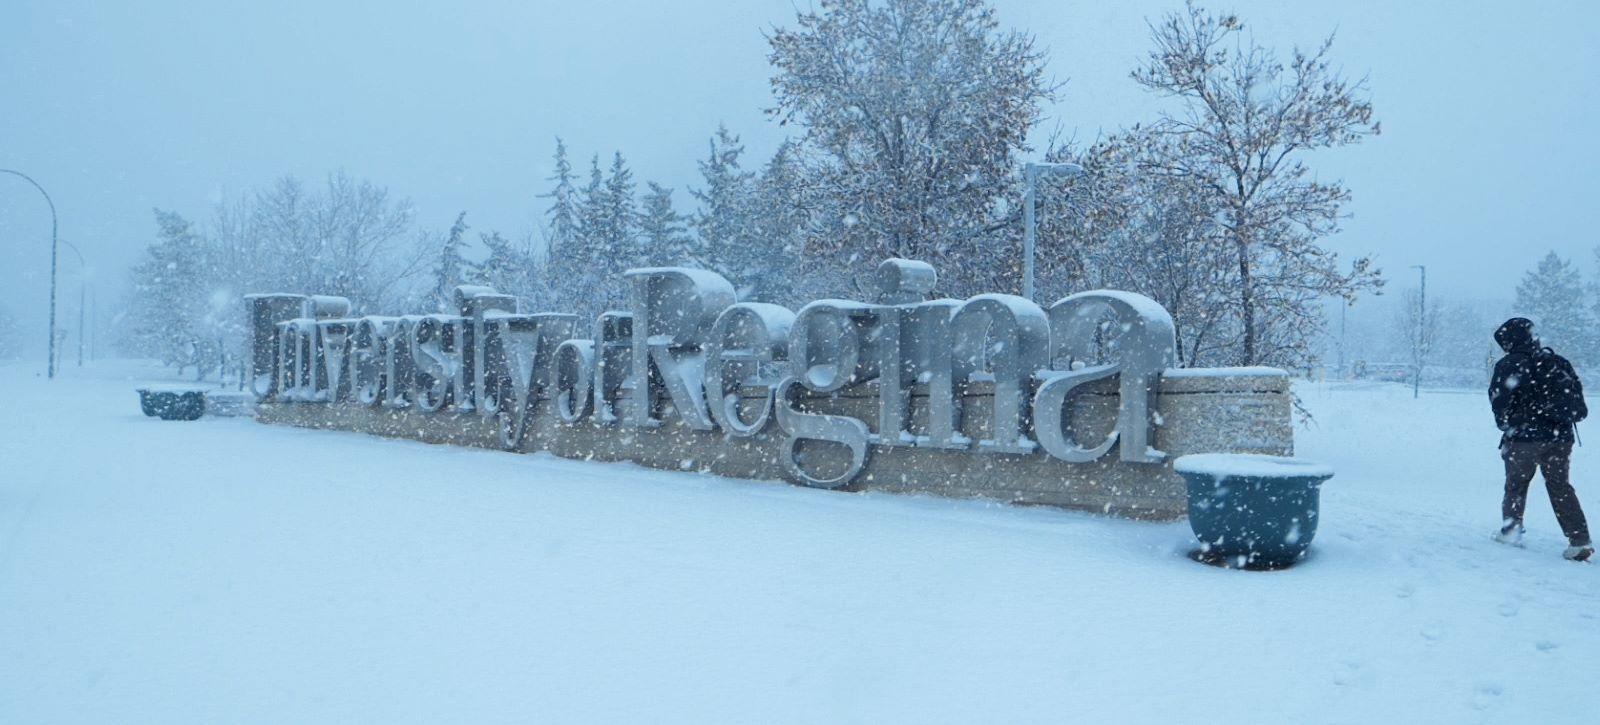 A sign that says University of Regina in winter